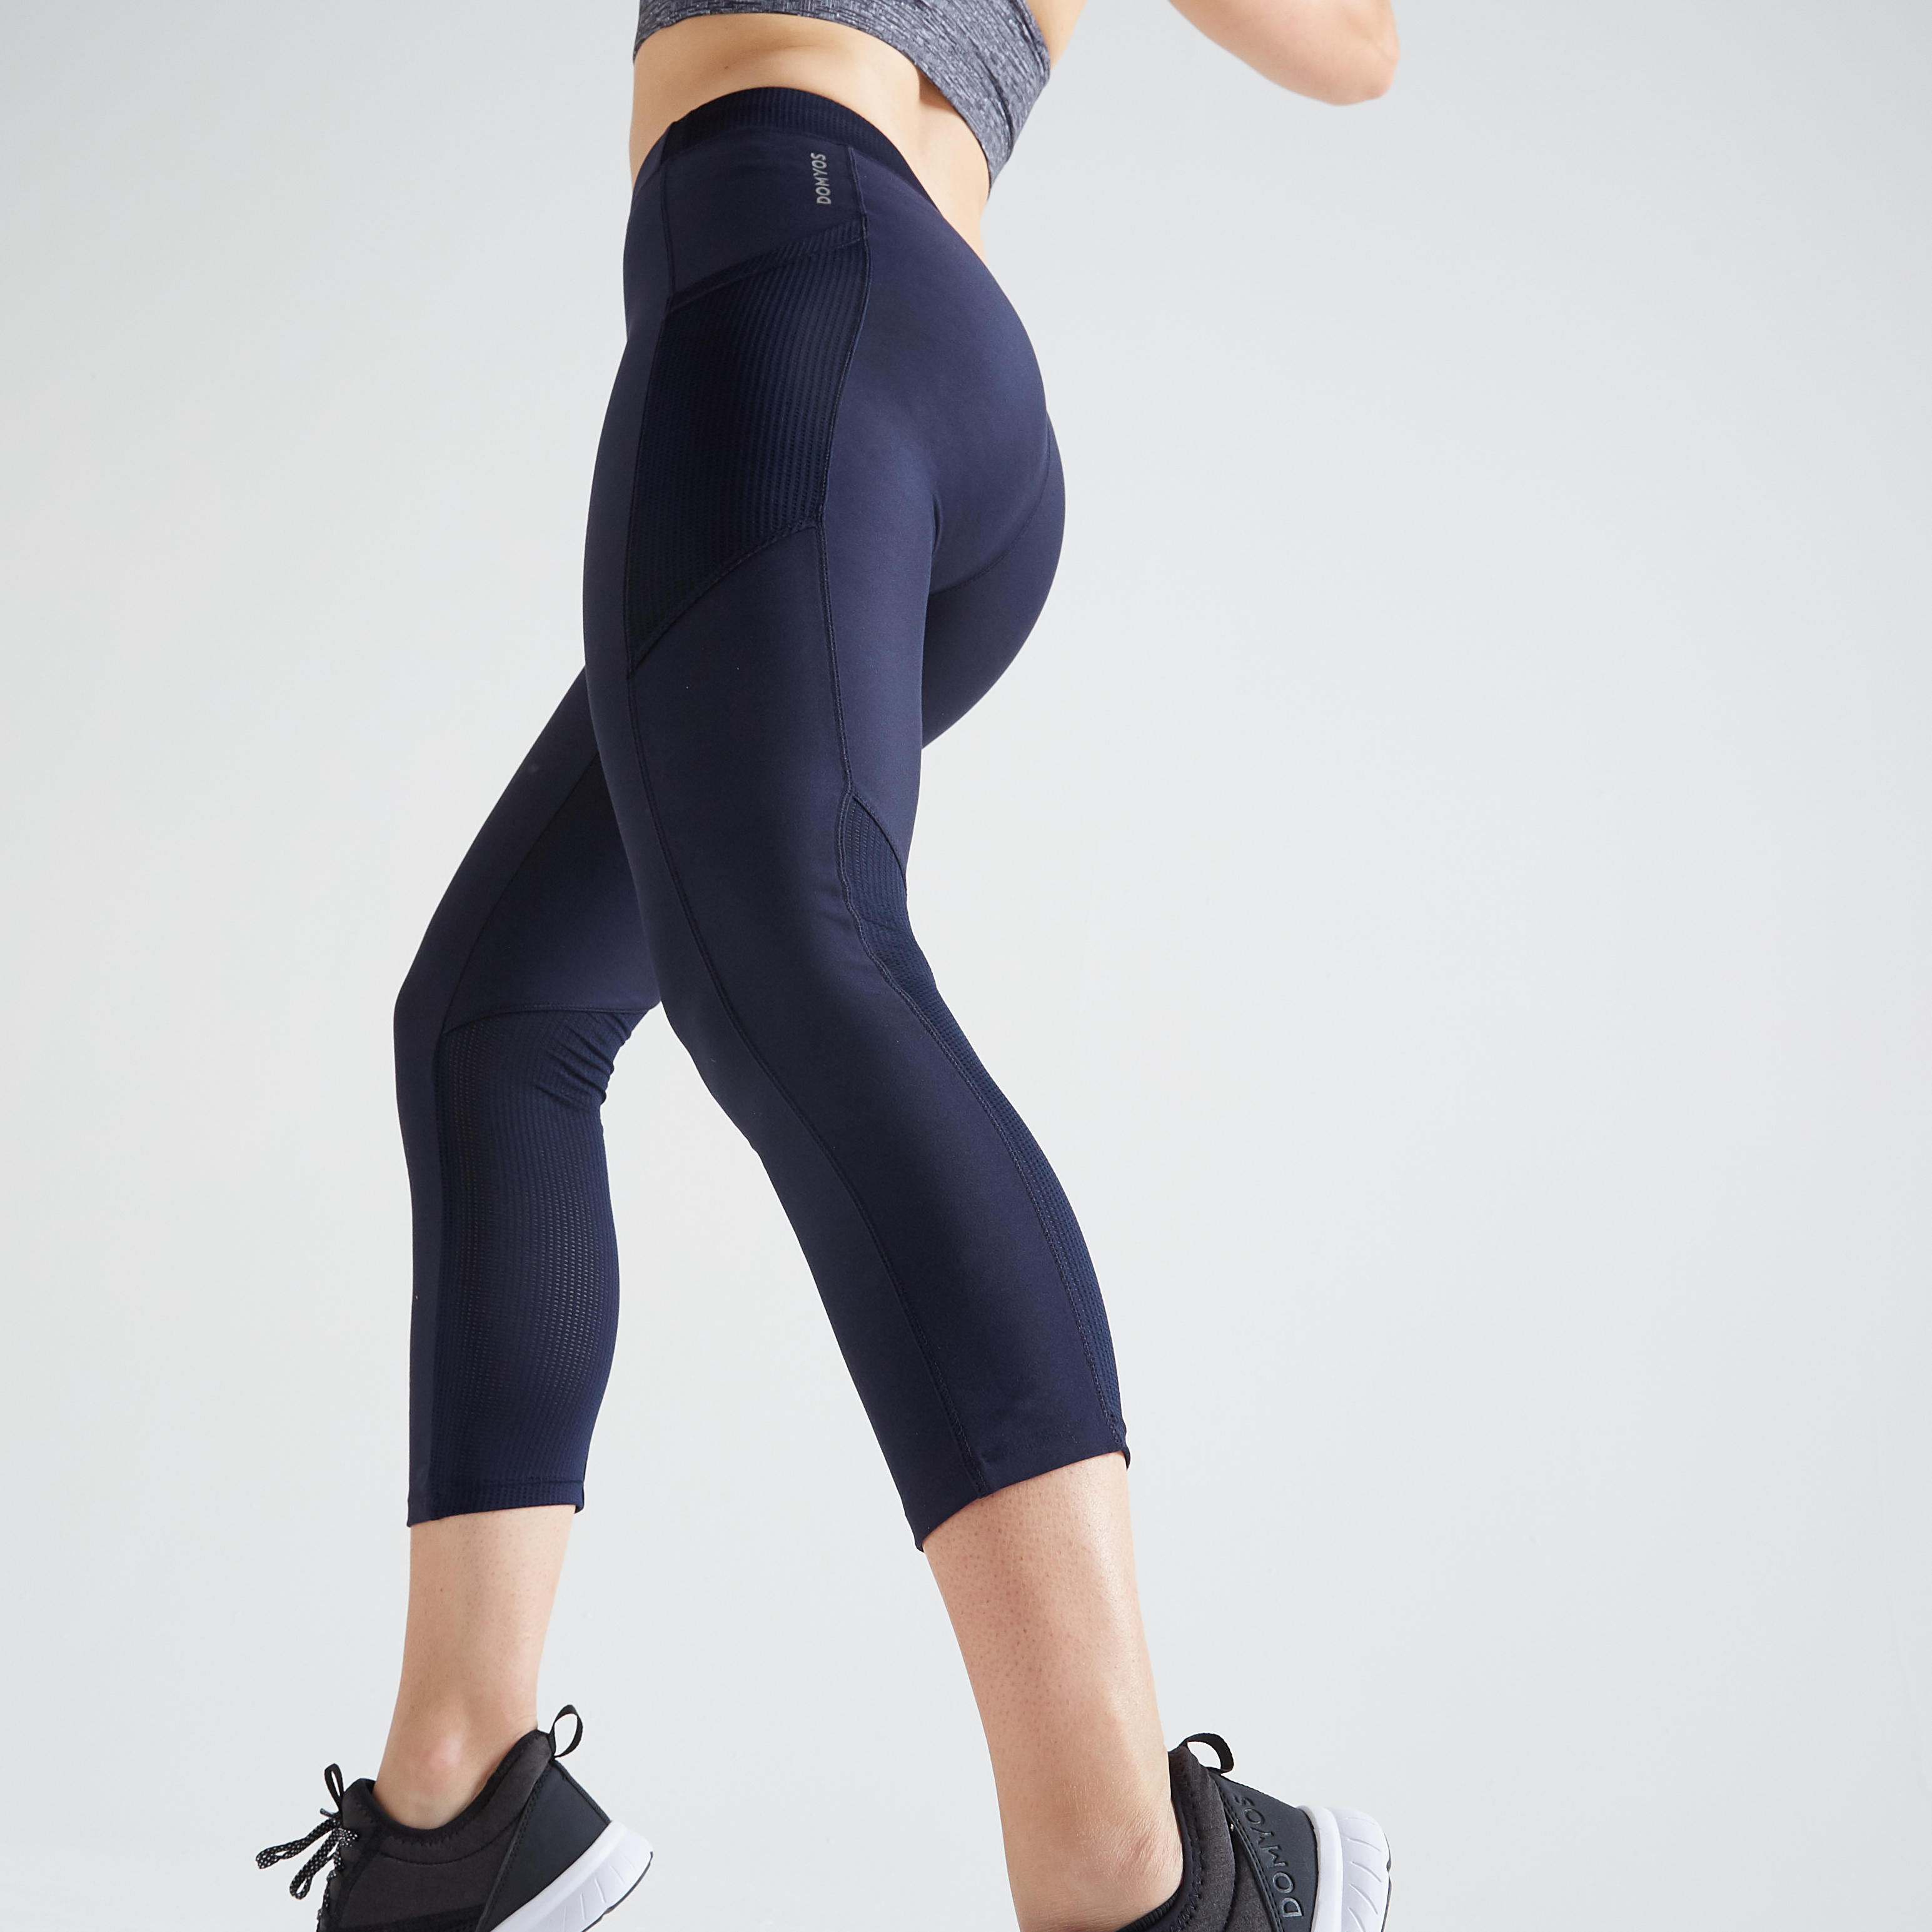 Decathlon launches leggings for everyone as part of body positive gym  range  The Sun